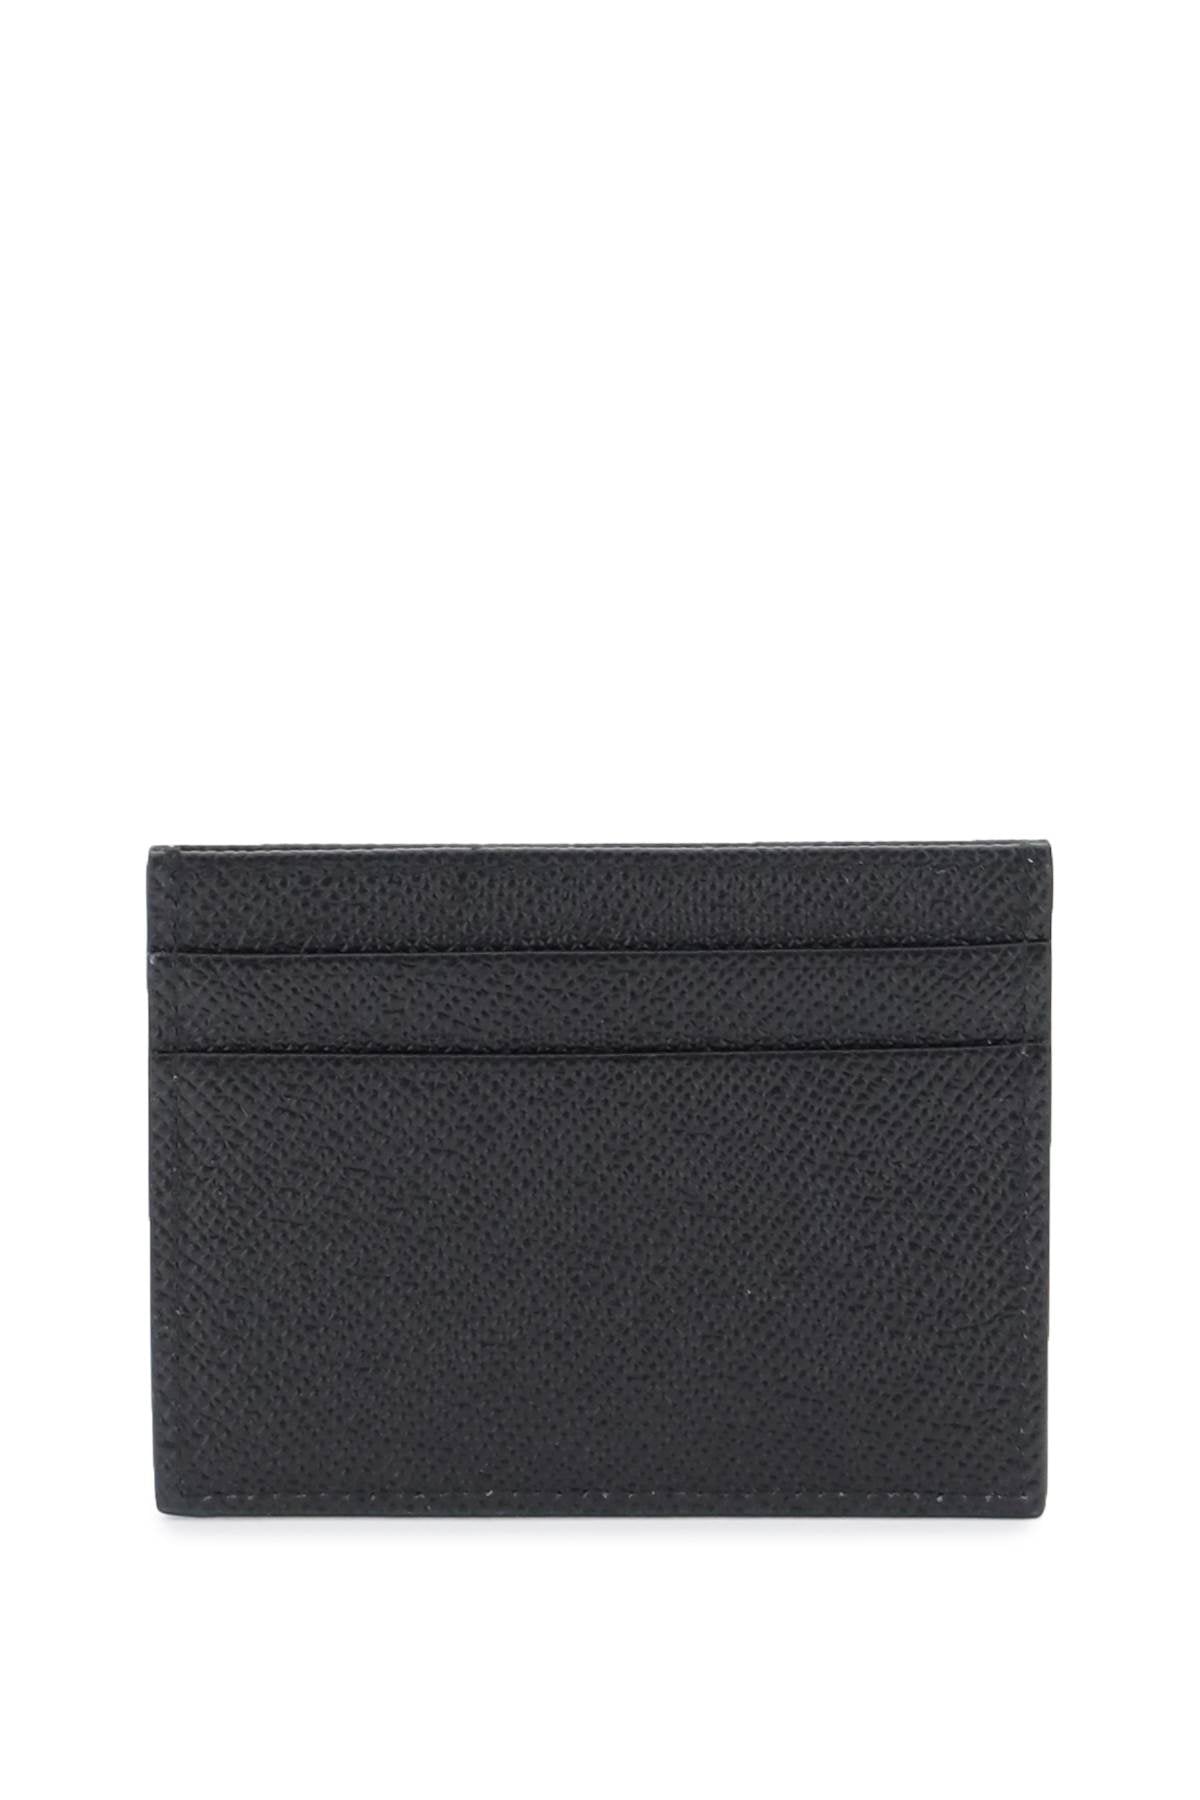 Dolce & gabbana leather card holder with logo plate-2